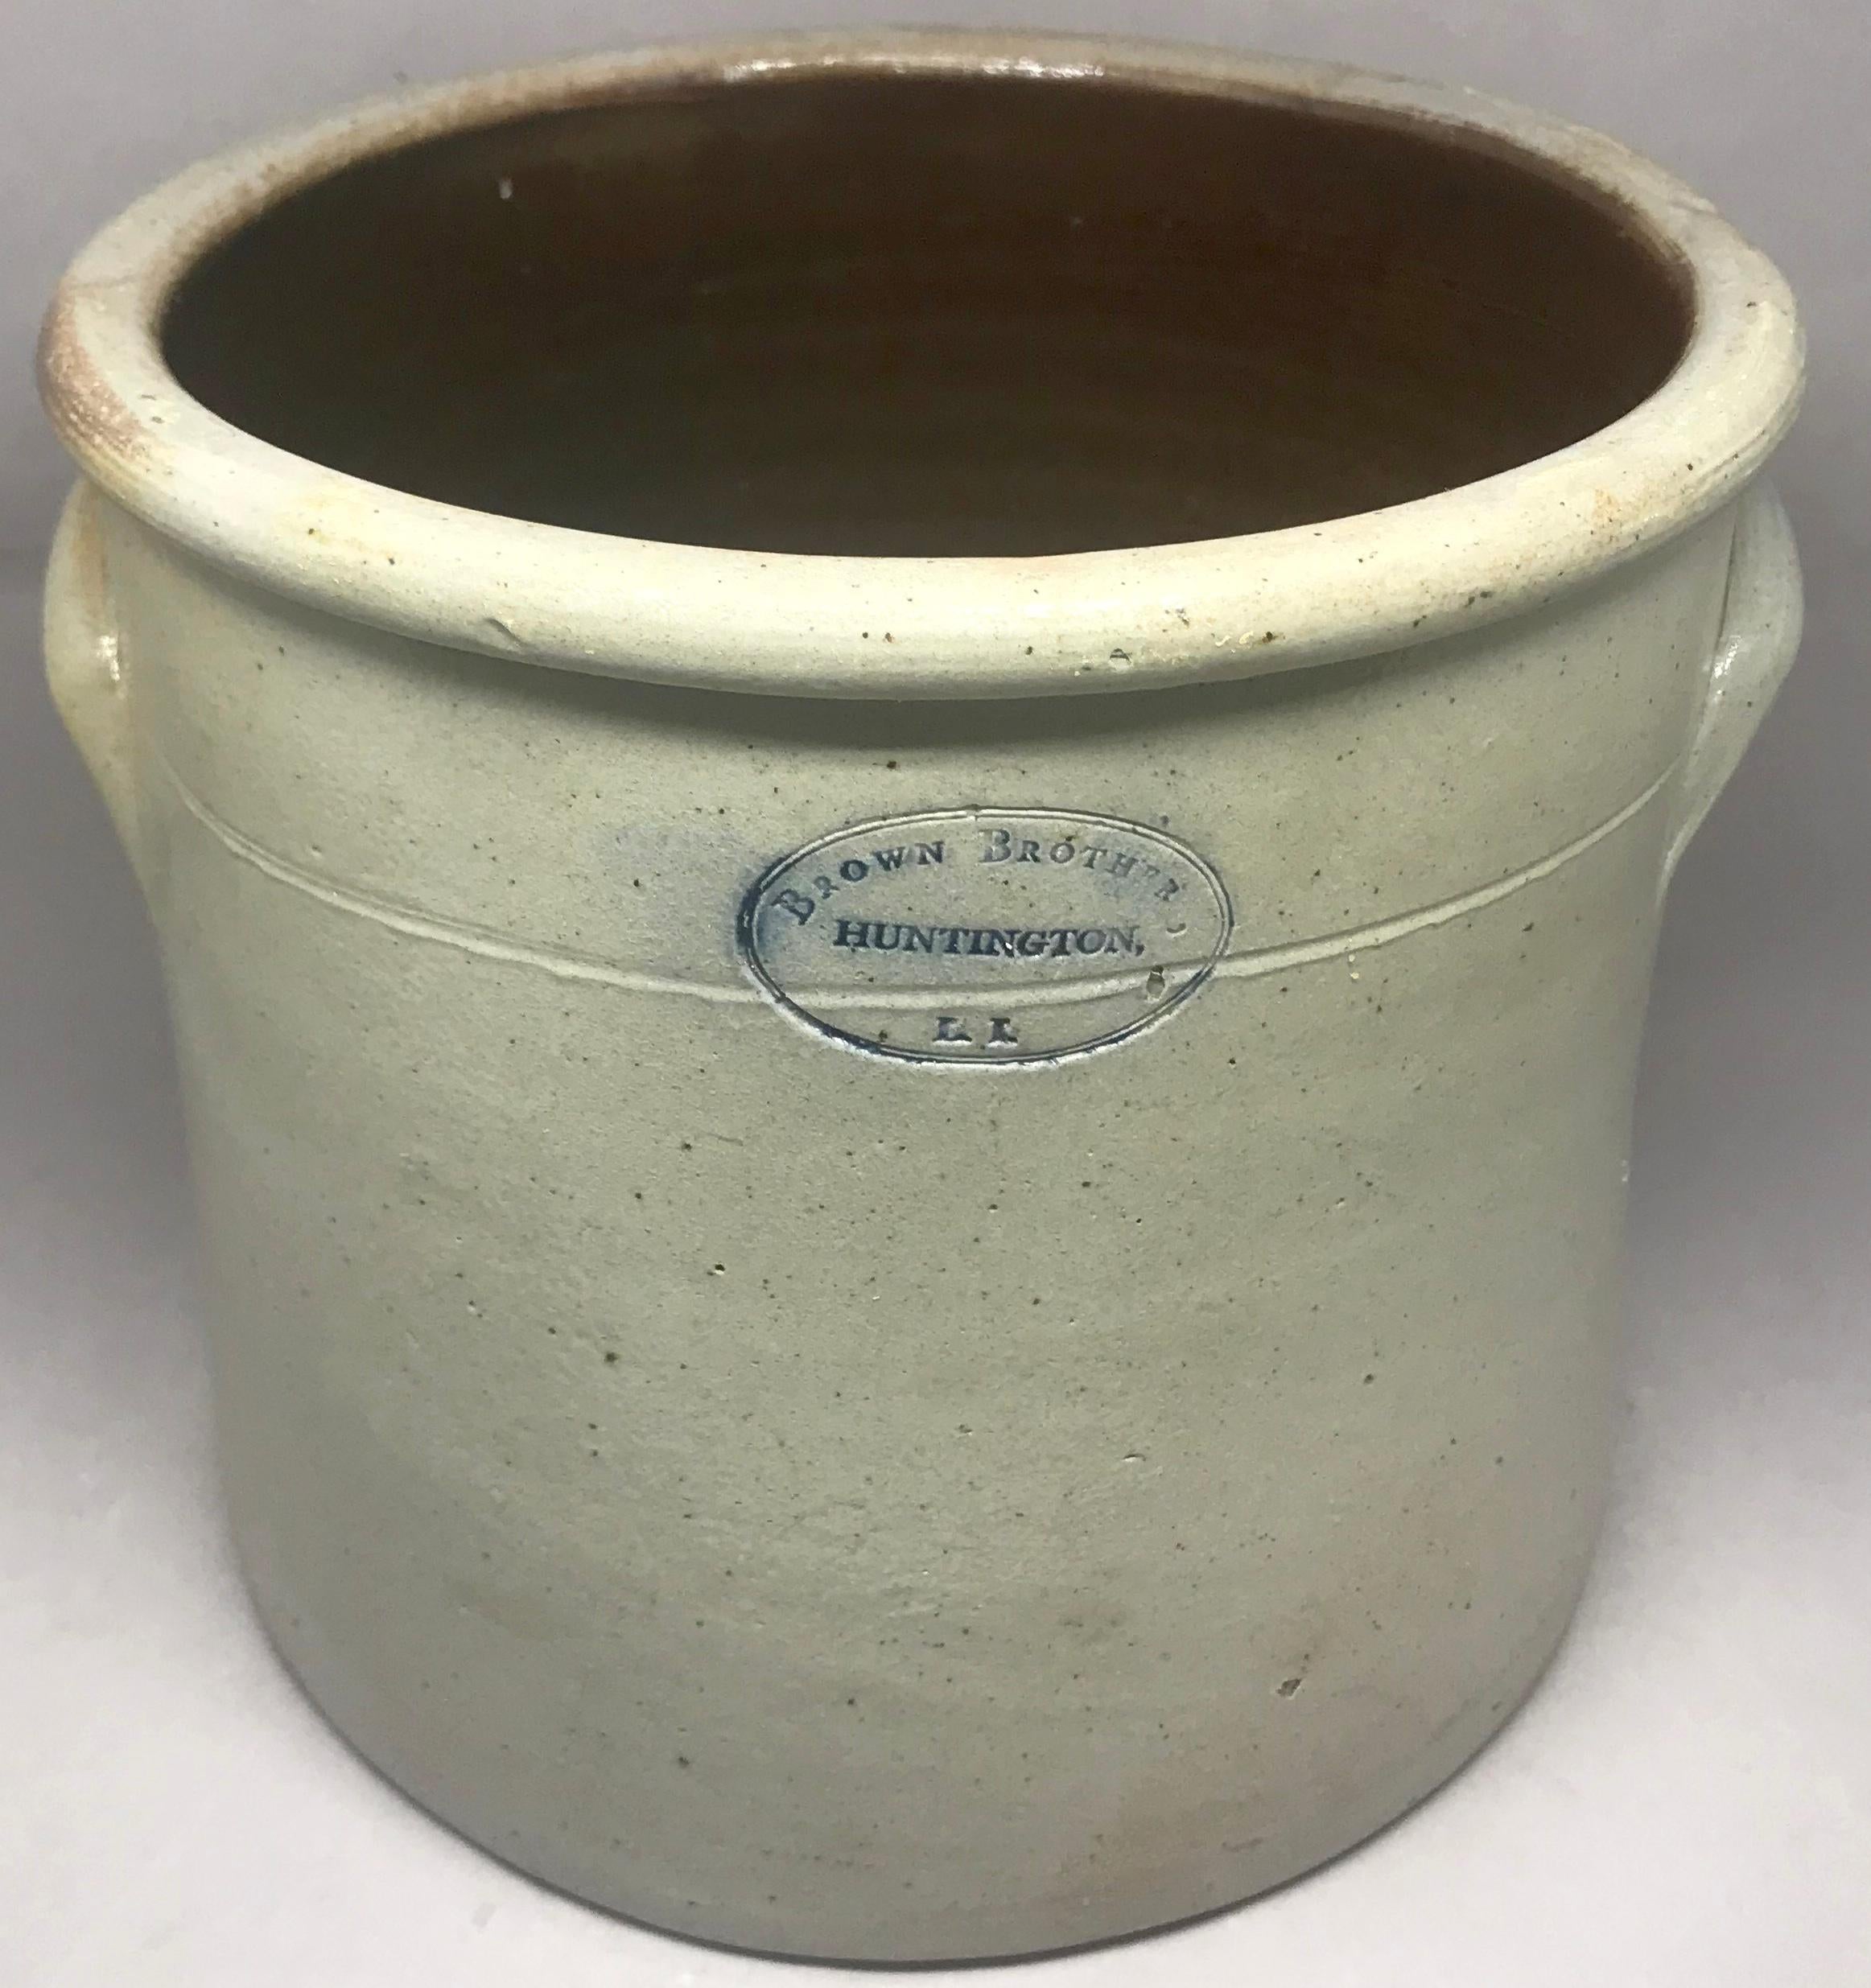 Brown Bros. stoneware crock. Antique crock in a soft putty colour with handles and blue lettering from one of the largest and longest in operation potteries on Long Island, the Brown Brothers Pottery, established in 1863 on the harbor where the clay